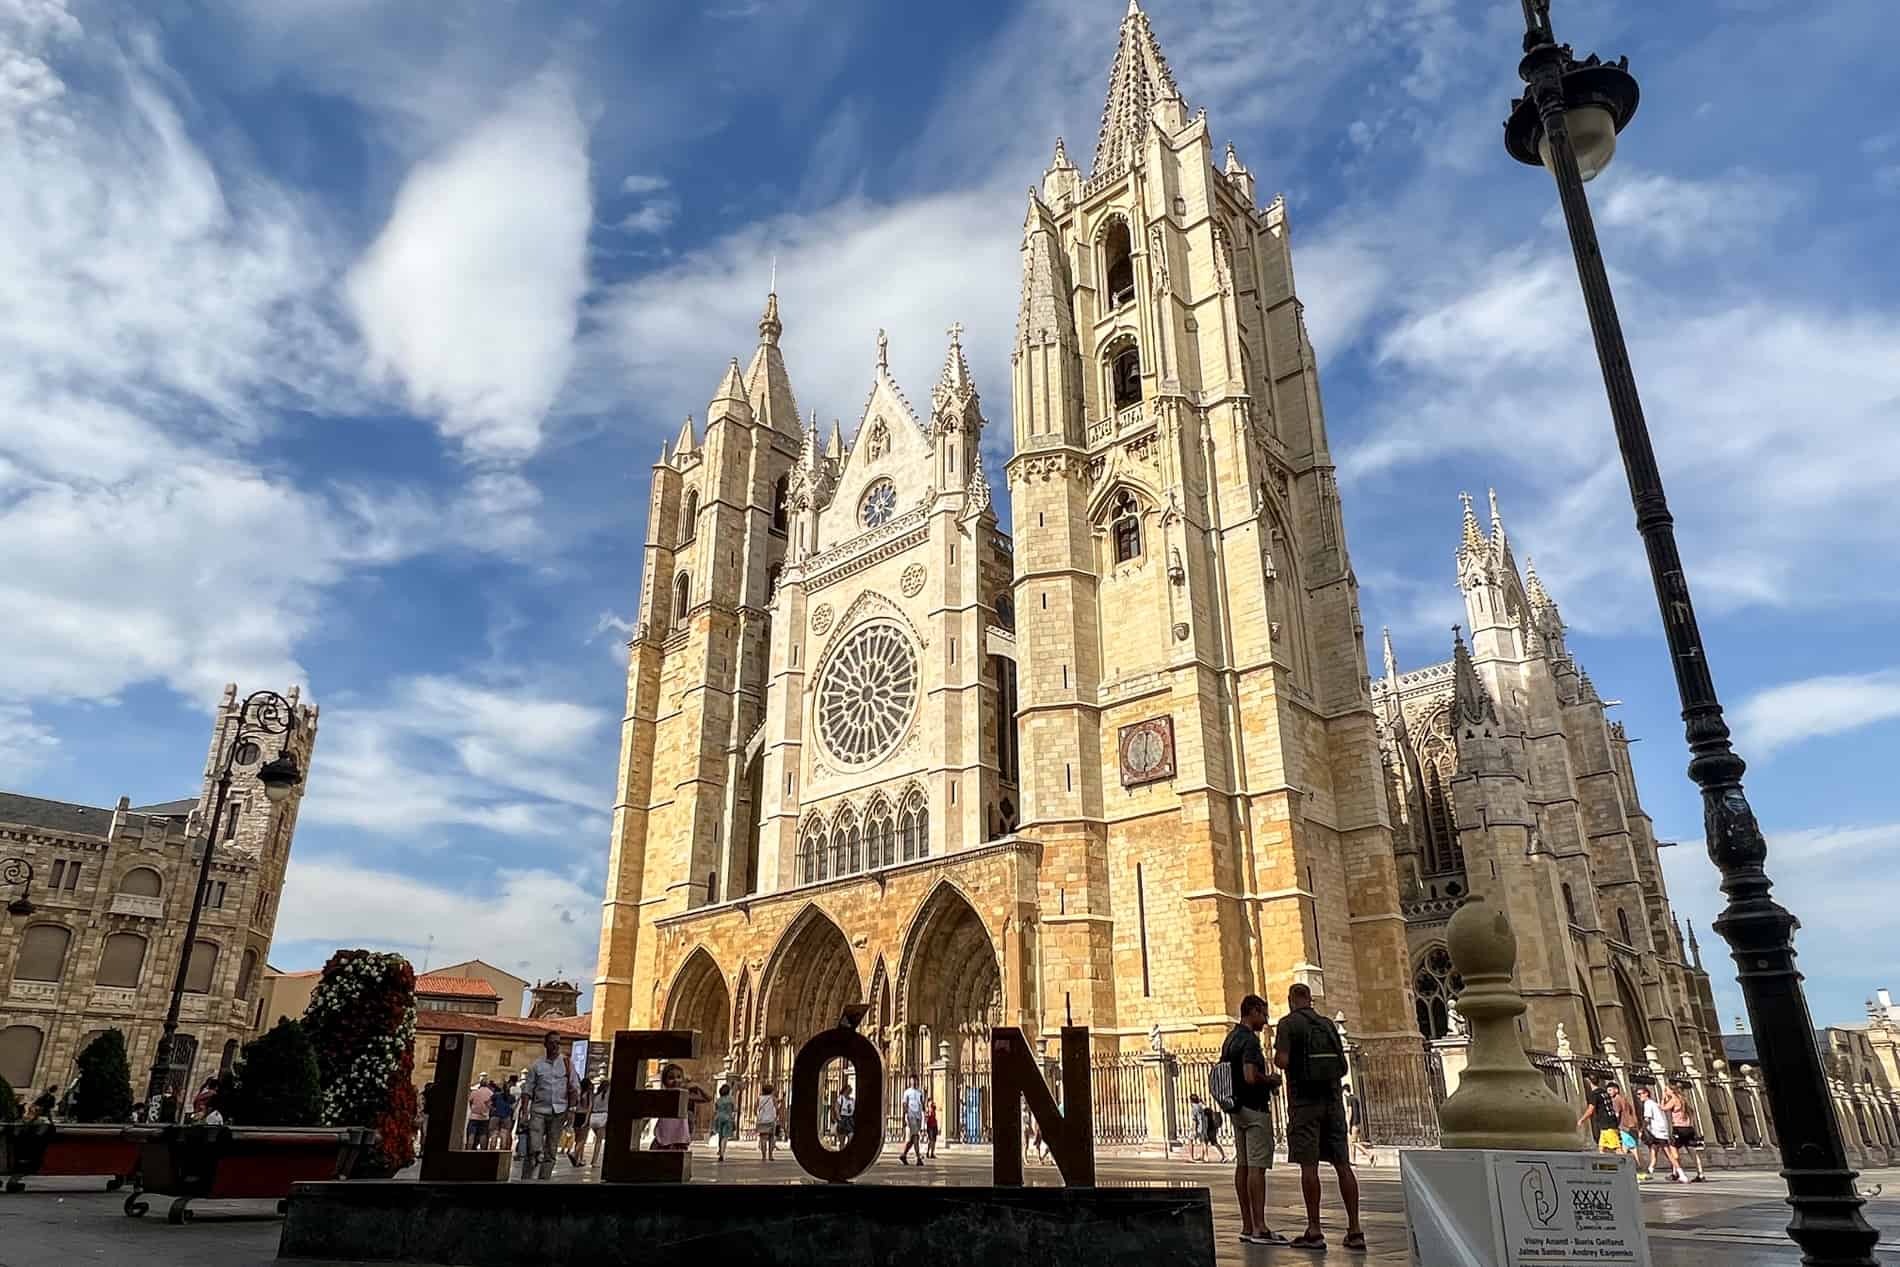 A bronze León sign on the square in front of the magnificent golden gothic structure of León Cathedral.